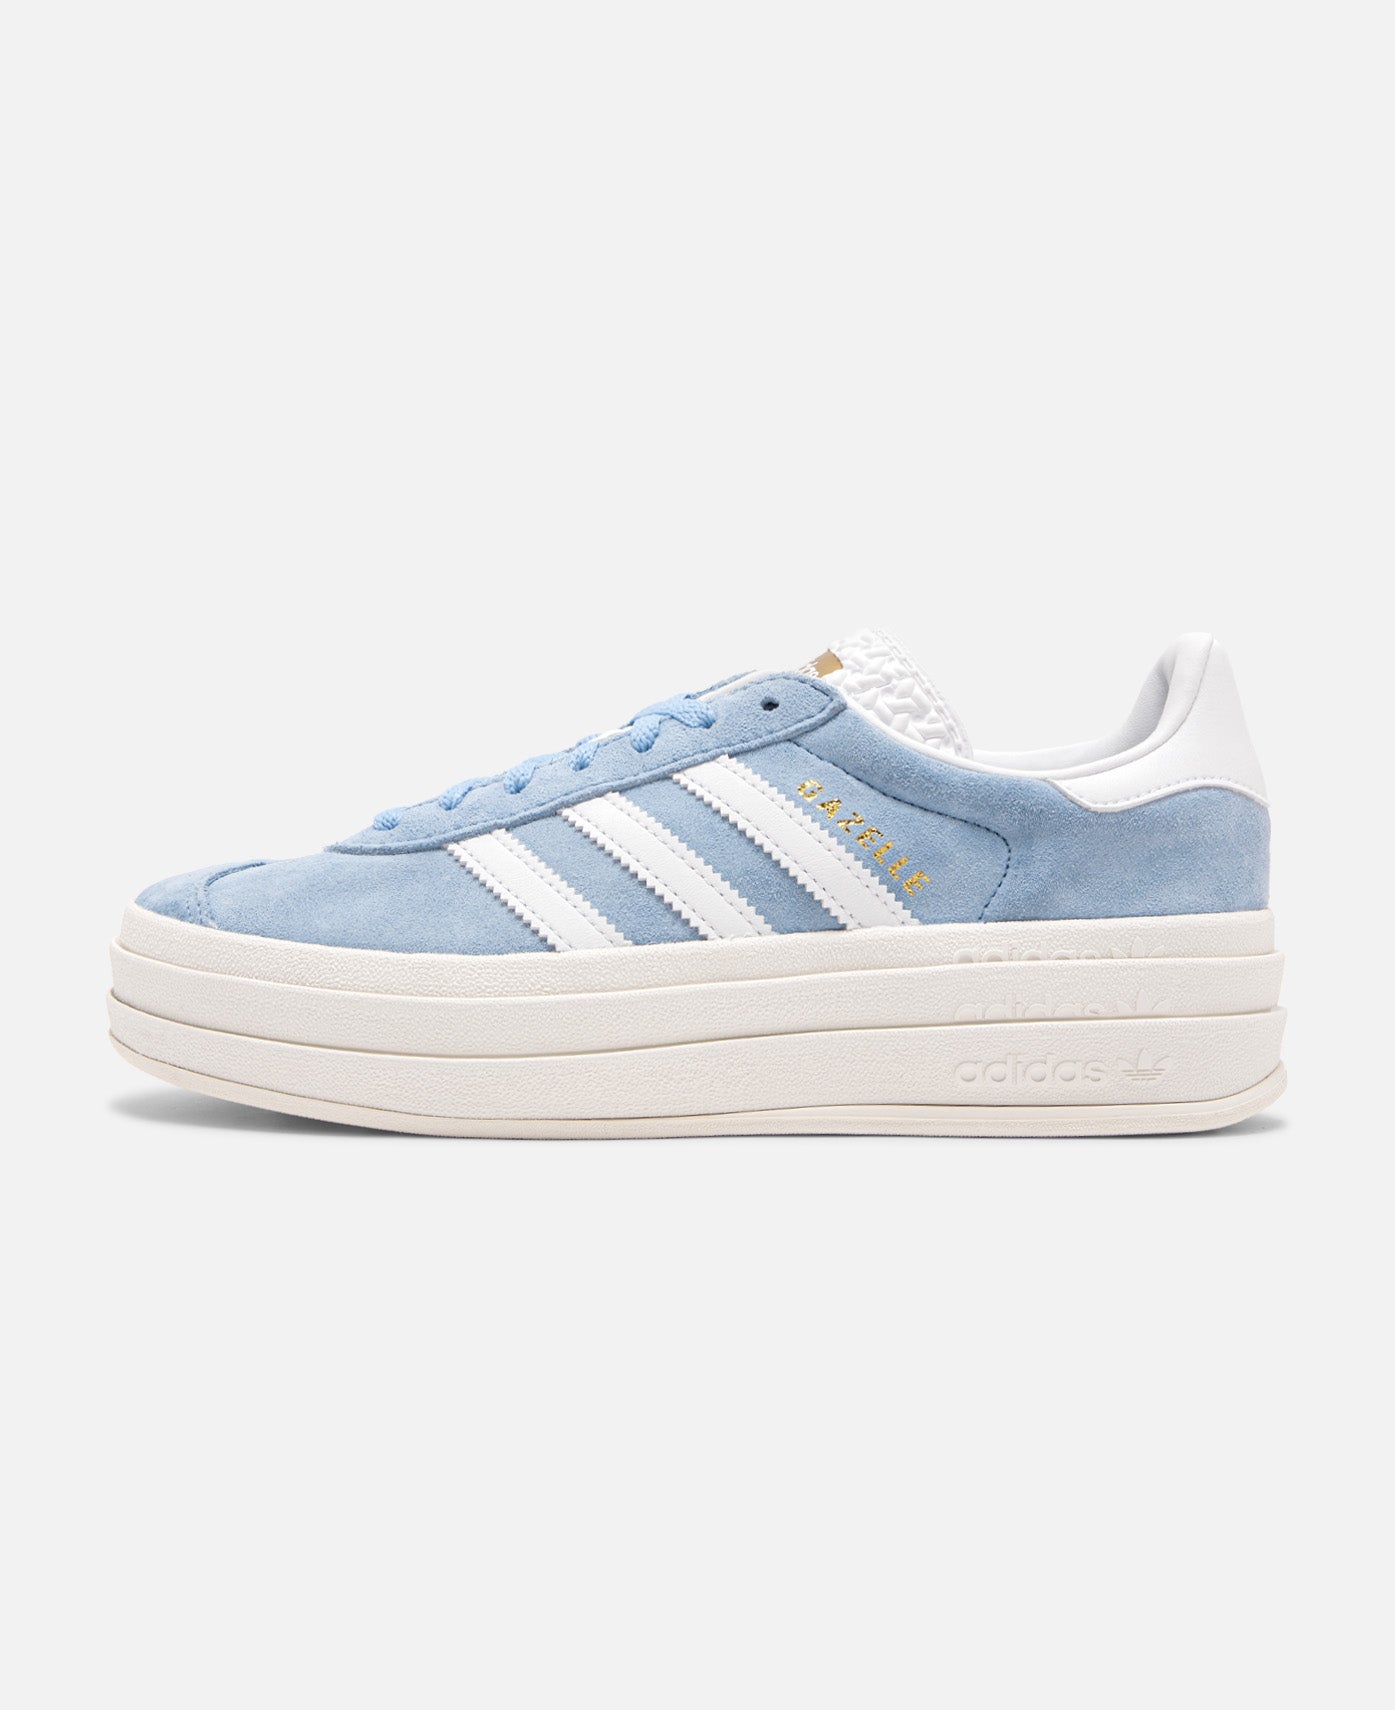 https://juicestore.com/en-sg/collections/adidas/products/gazelle-bold-w-blue